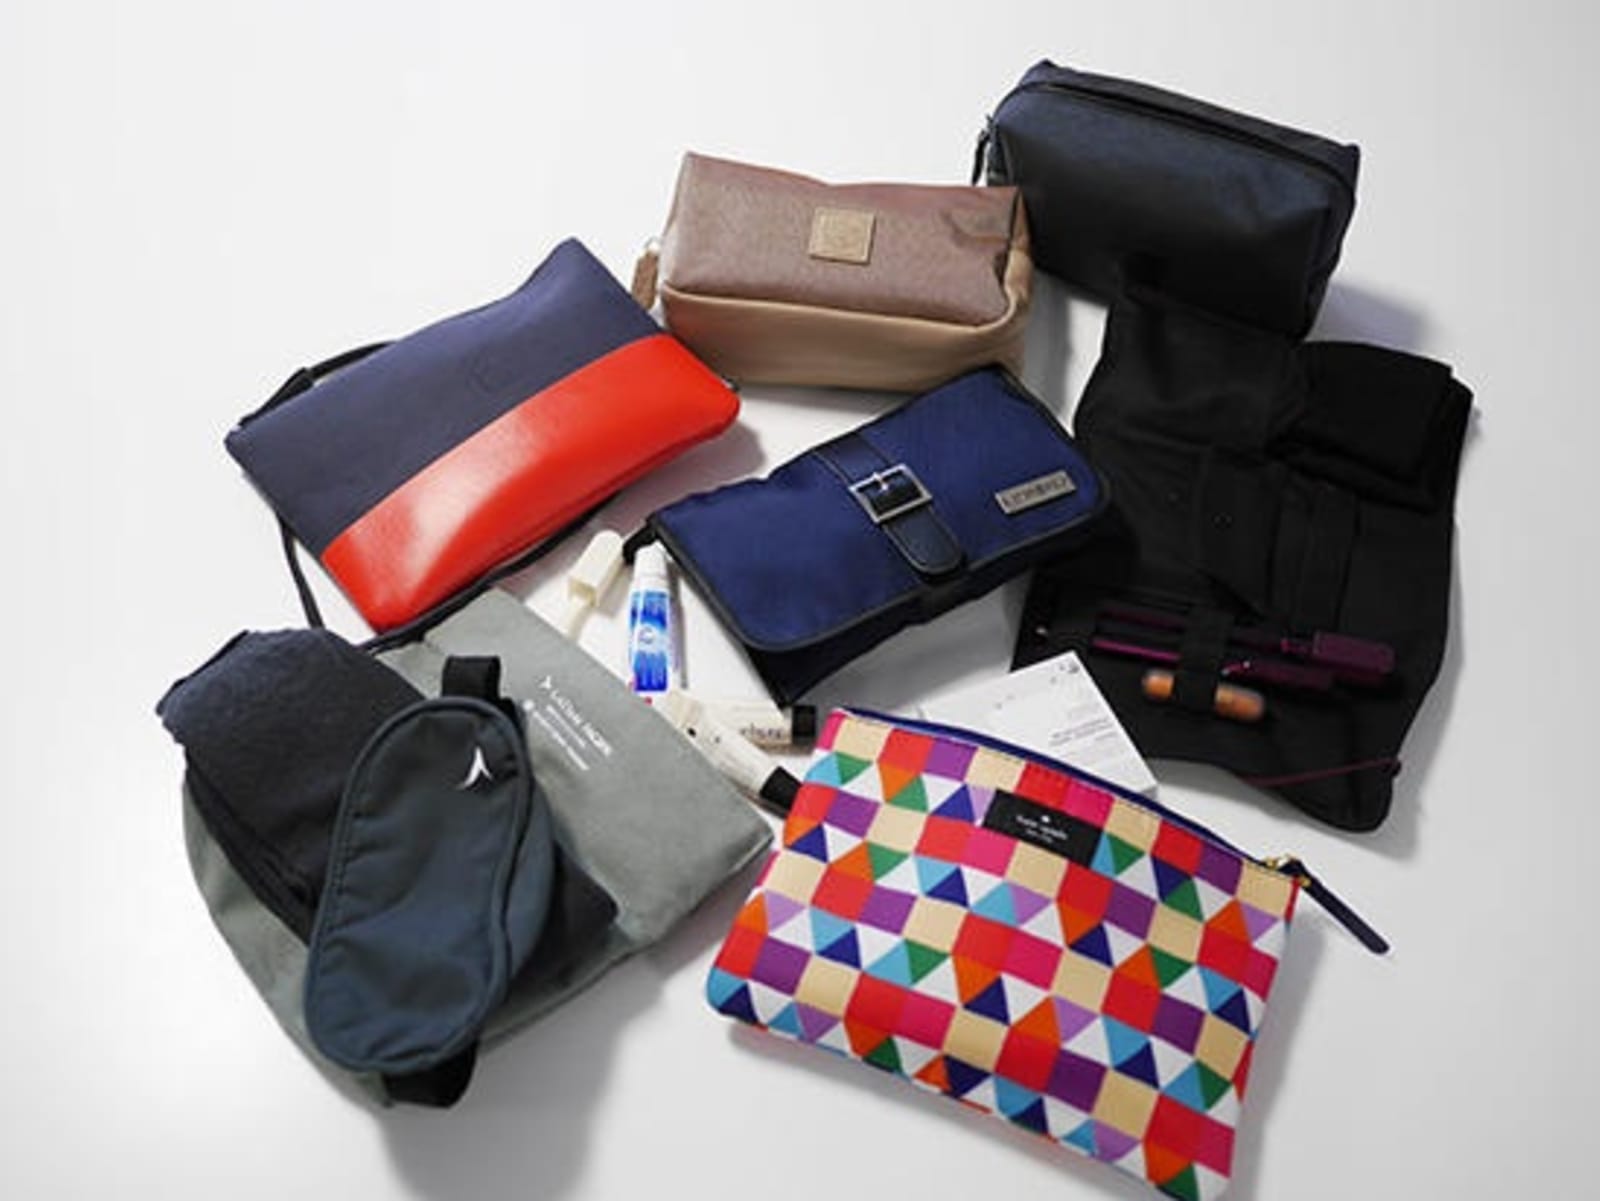 New luxury amenity kits land on American Airlines – flyfit.com